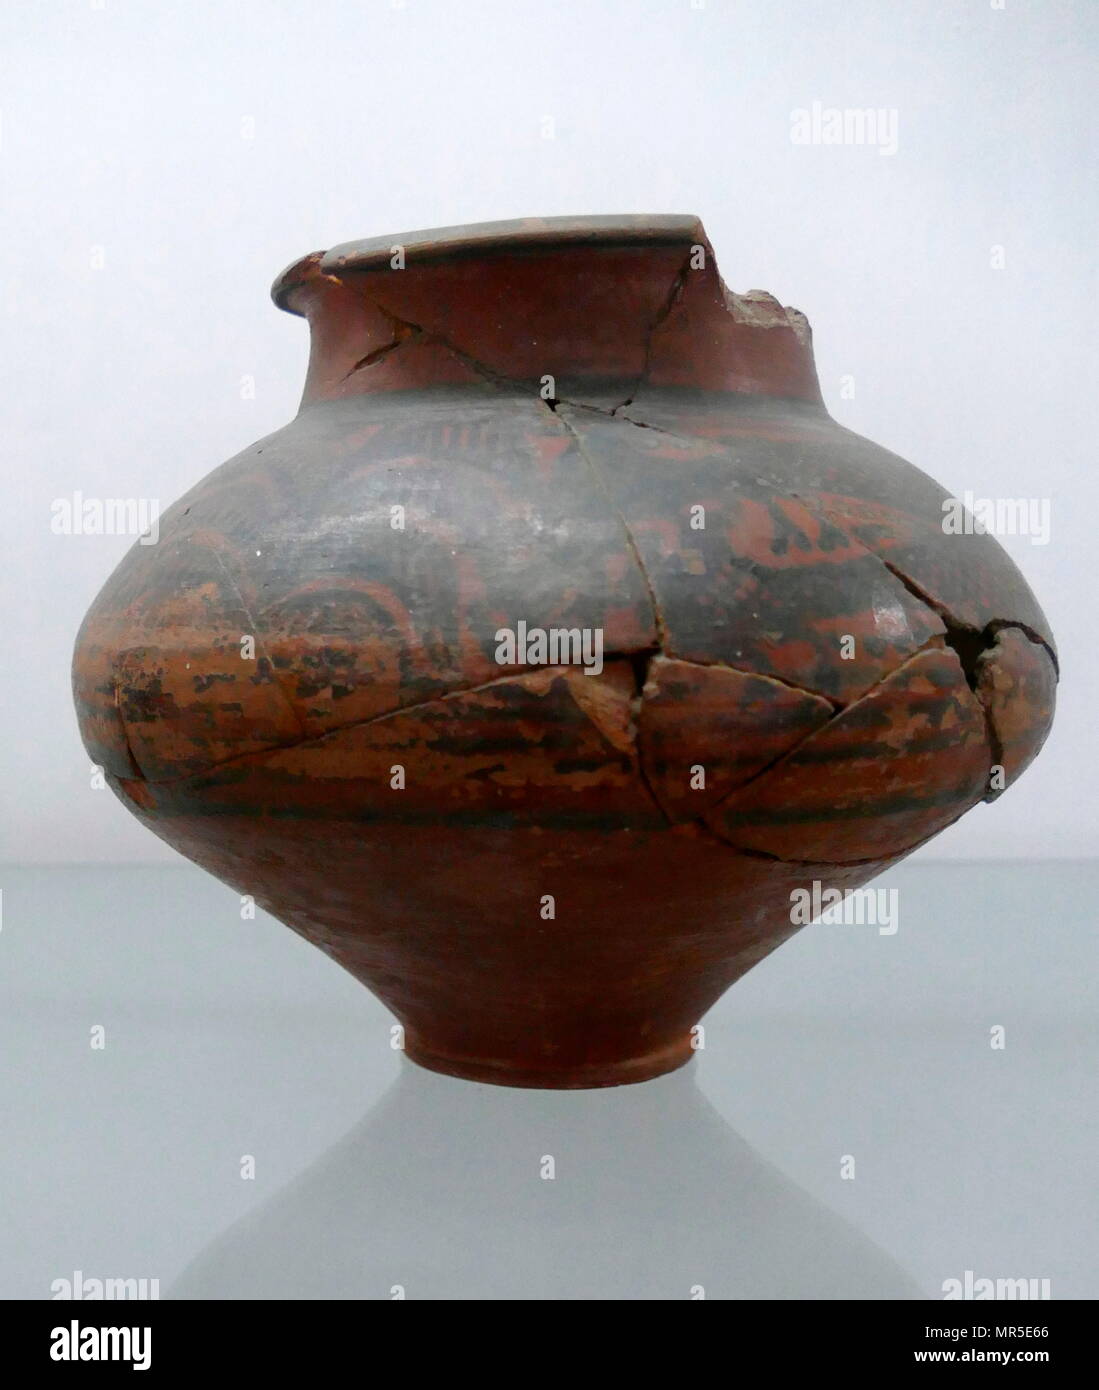 Terracotta Harappa ceramic vase from the Indus Valley Civilisation at Mohenjo-Daro, Pakistan. The Indus Valley Civilisation was a Bronze Age culture, (3300–1300 BCE; mature period 2600–1900 BCE) mainly in the north-western regions of South Asia, extending from what today is northeast Afghanistan to Pakistan and northwest India Stock Photo